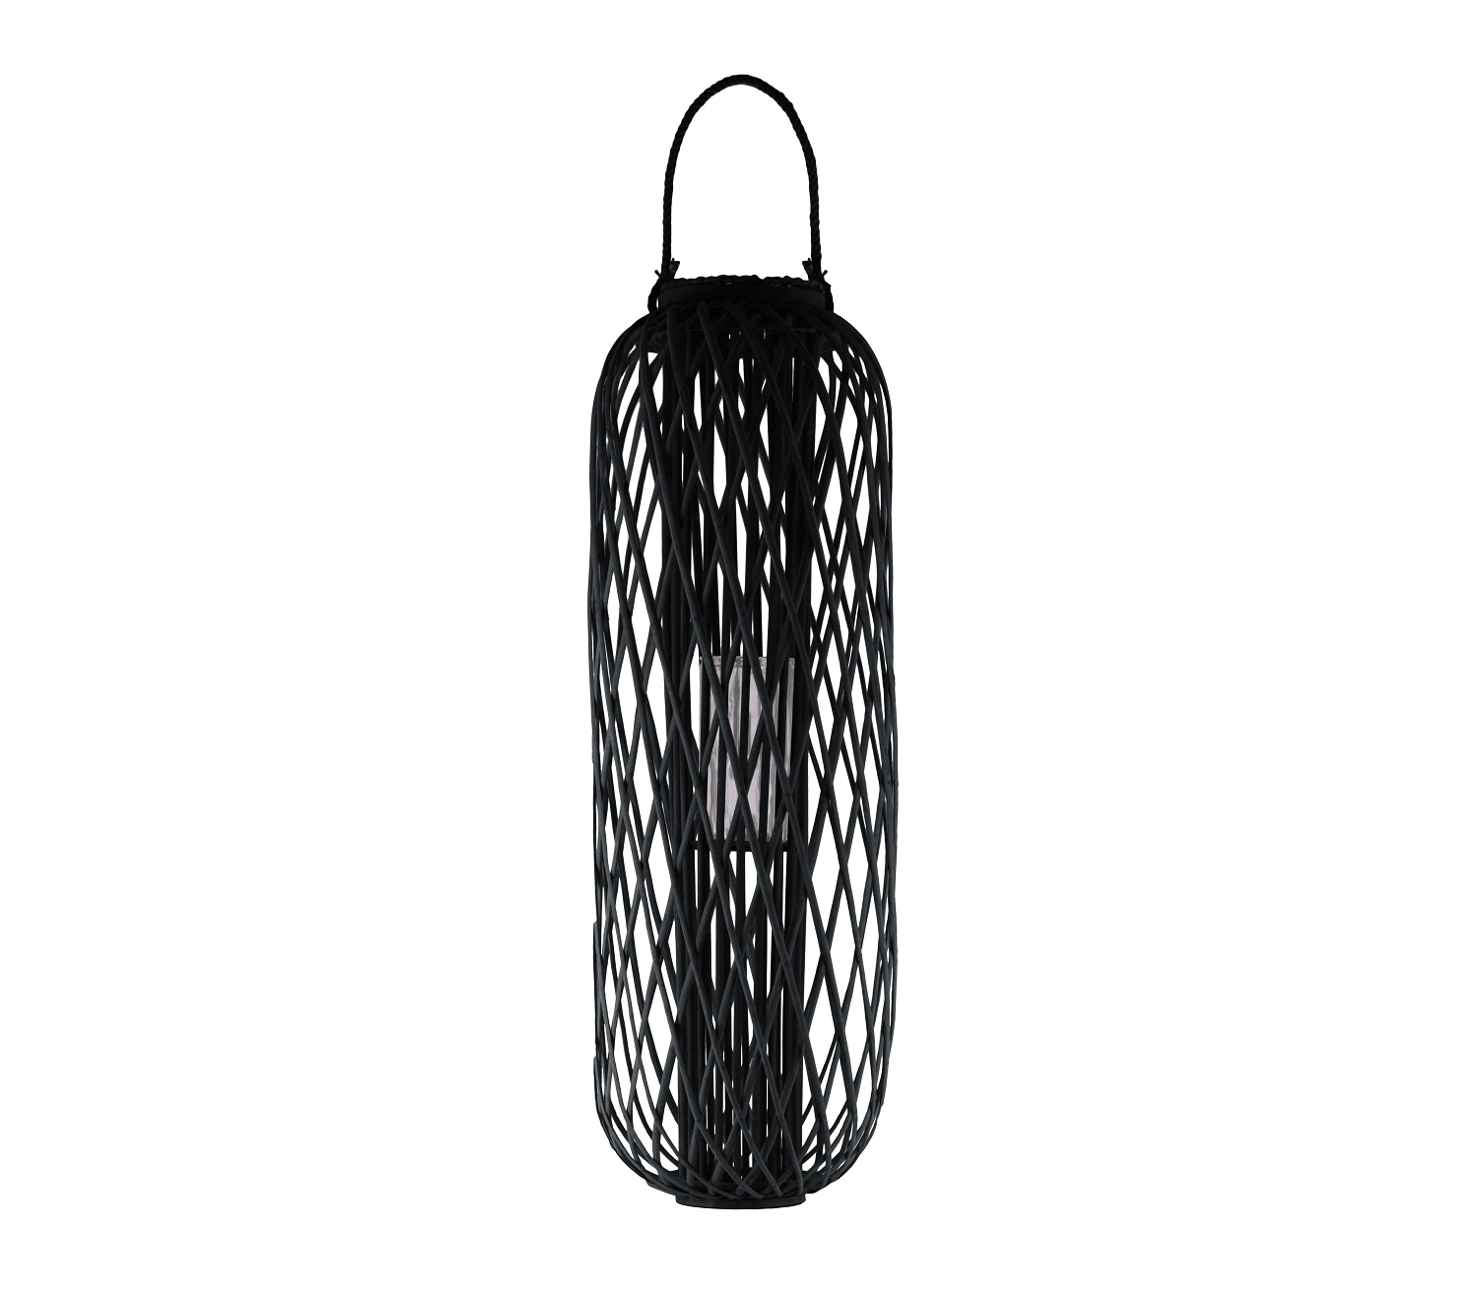 47.25”H X 15” Bamboo Round Lantern with Braided Rope Lip and Handle ...